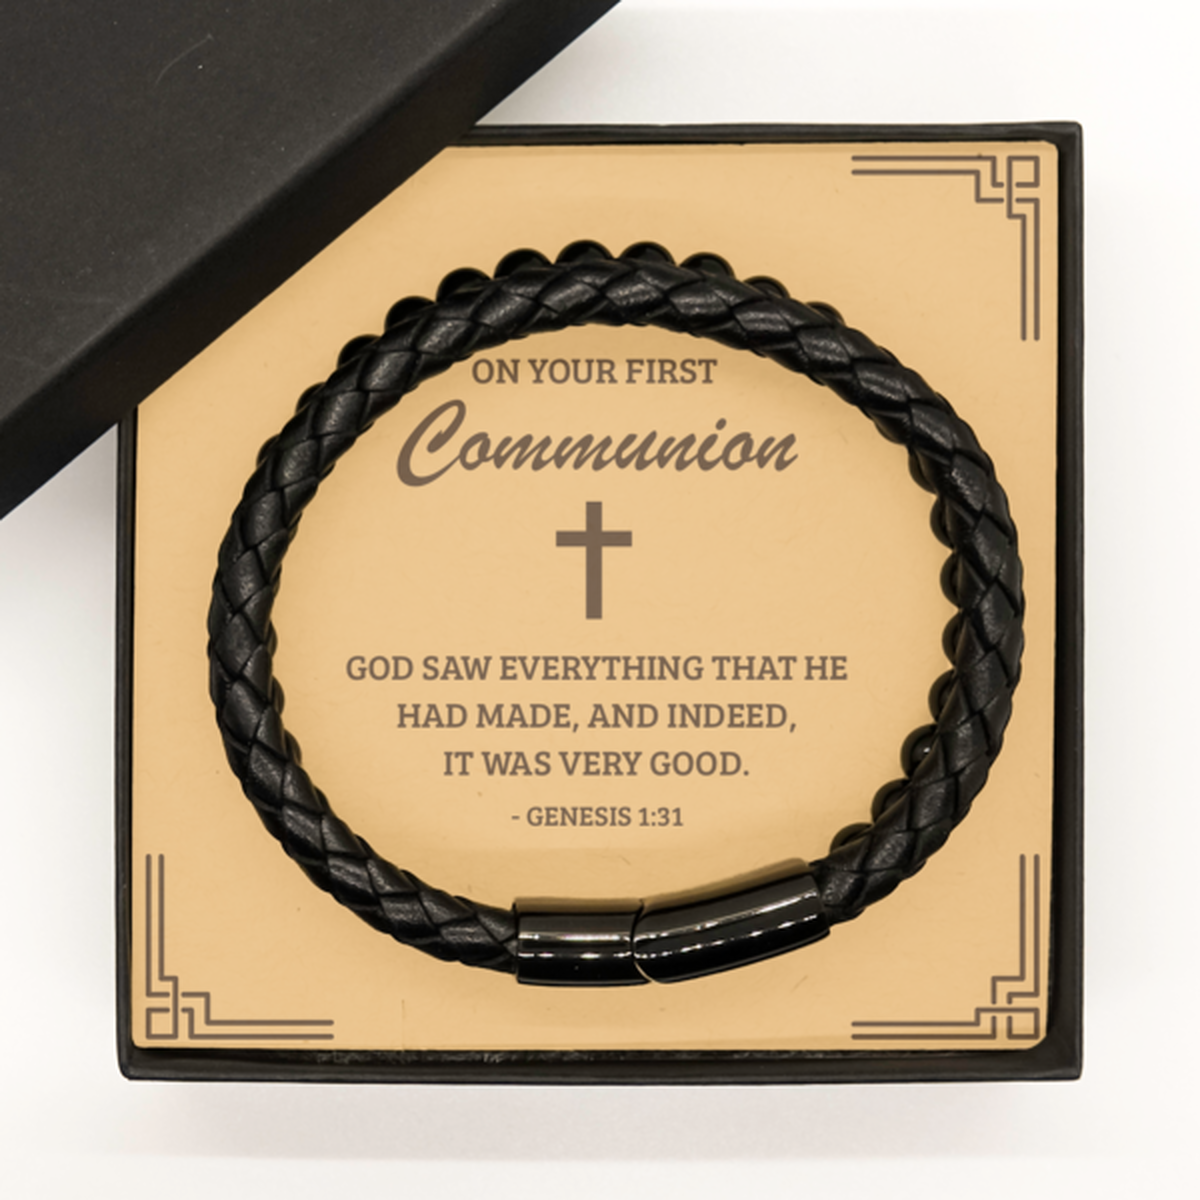 First Communion Gifts for Teenage Boys, God saw everything that he had made, Stone Leather Bracelet with Bible Verse Message Card, Religious Catholic Bracelet for Son, Grandson, Dad, Godfather